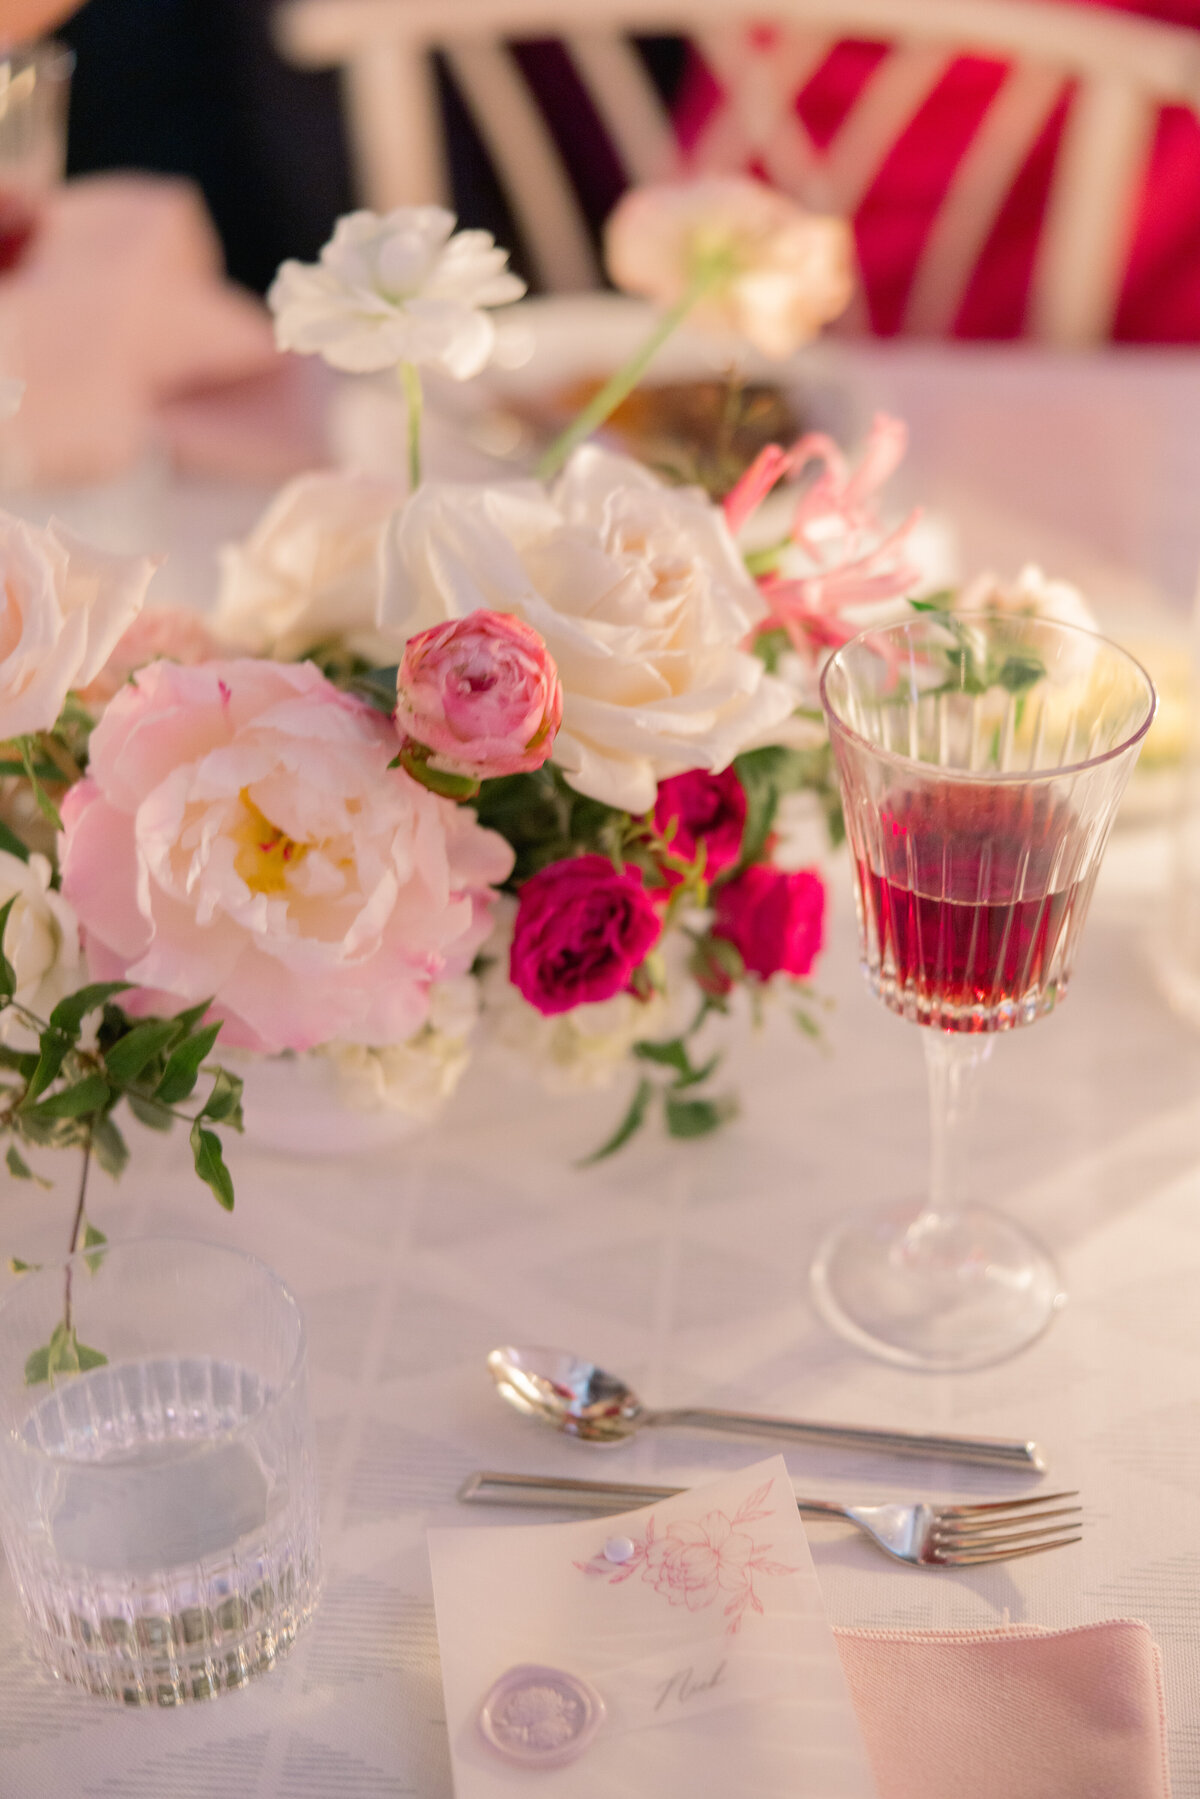 Luxe-velvet-blush-napkins-add-a-touch-of-elegance-to-this-wedding-reception